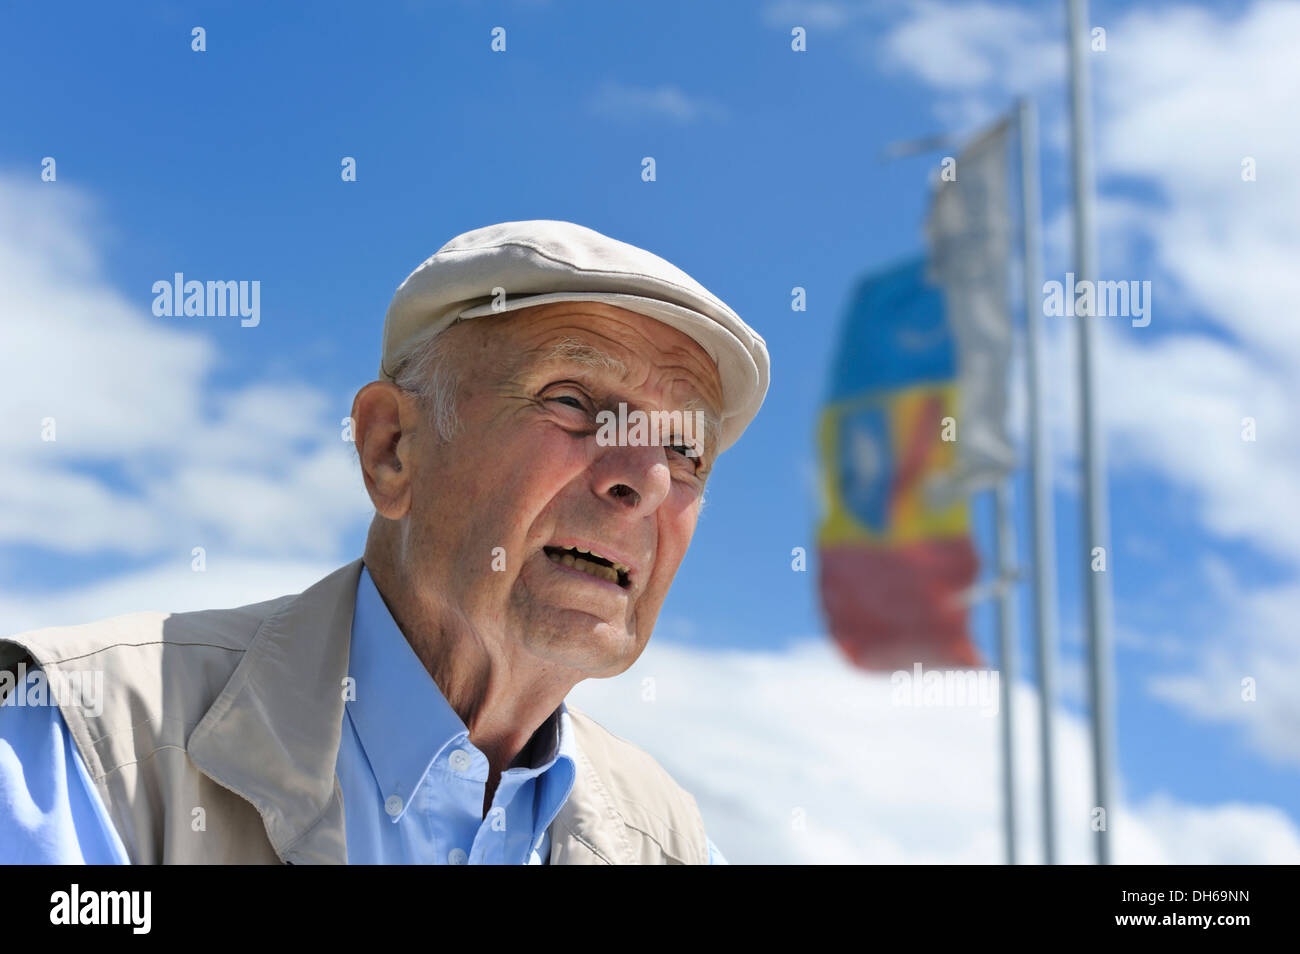 Old man with a peaked cap, portrait, PublicGround Stock Photo